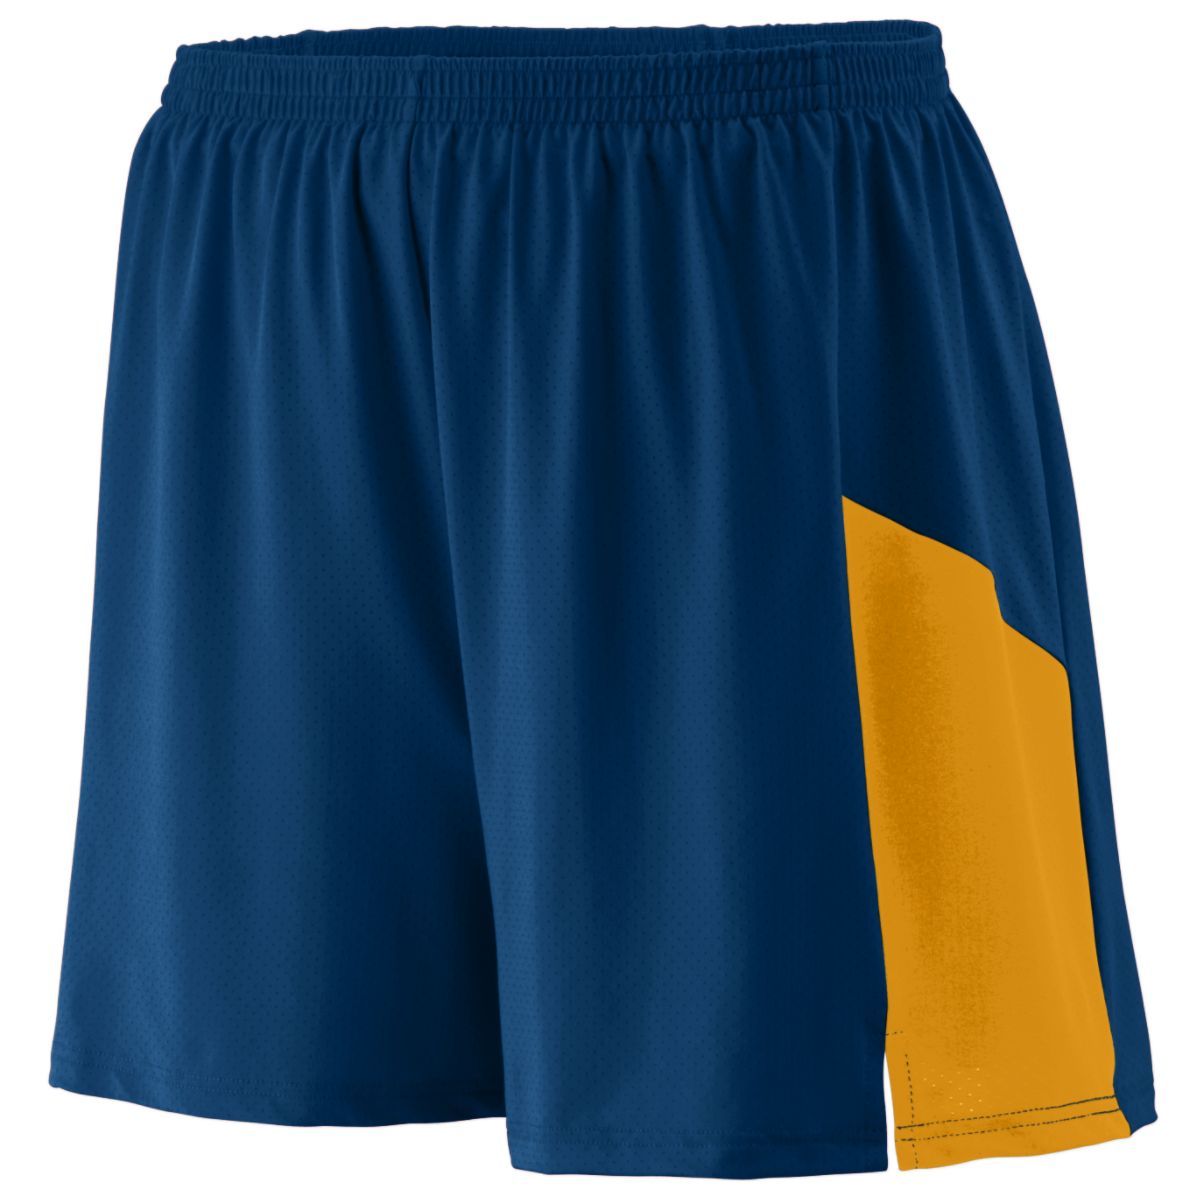 Augusta Sportswear Sprint Shorts in Navy/Gold  -Part of the Adult, Adult-Shorts, Augusta-Products, Track-Field product lines at KanaleyCreations.com